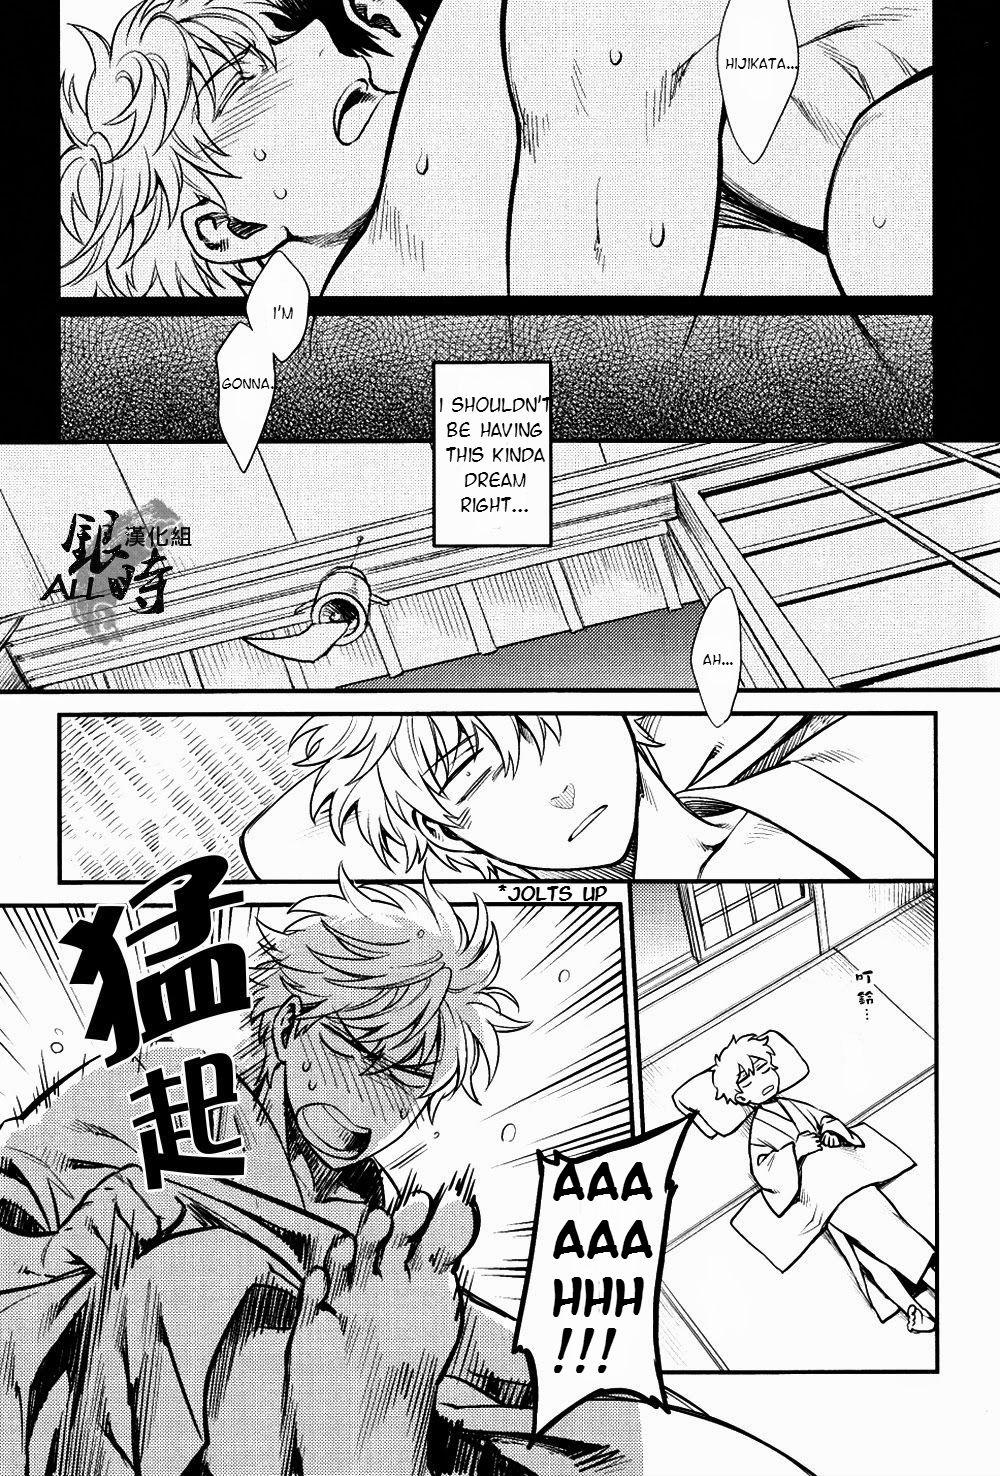 Swinger Please! Gintoki - Gintama And - Page 4